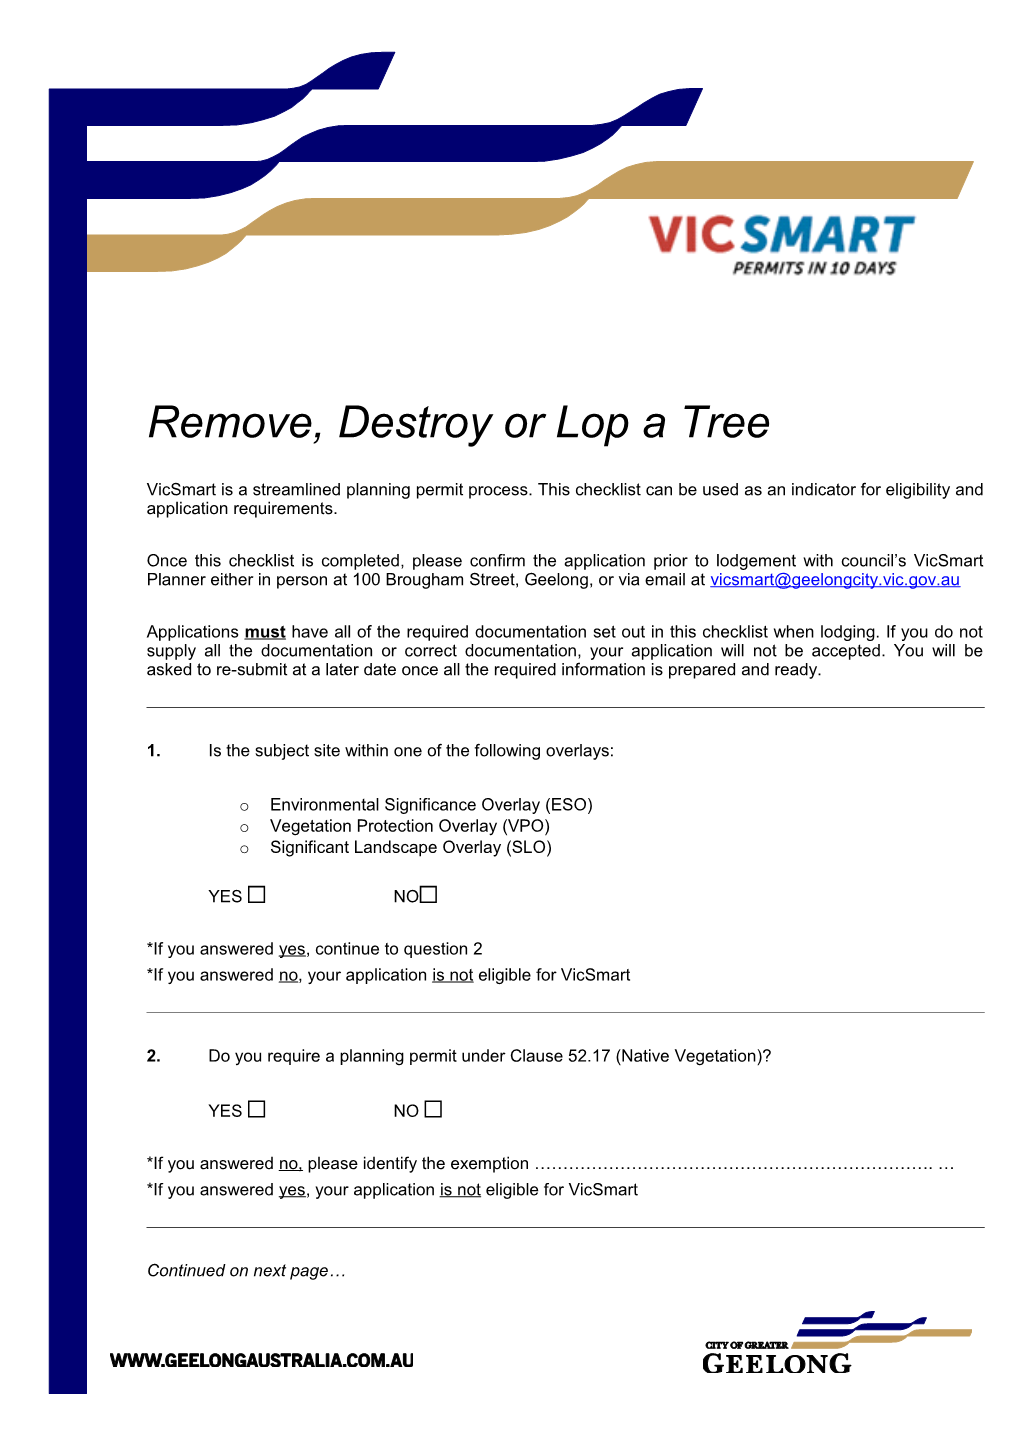 Remove, Destroy Or Lop a Tree